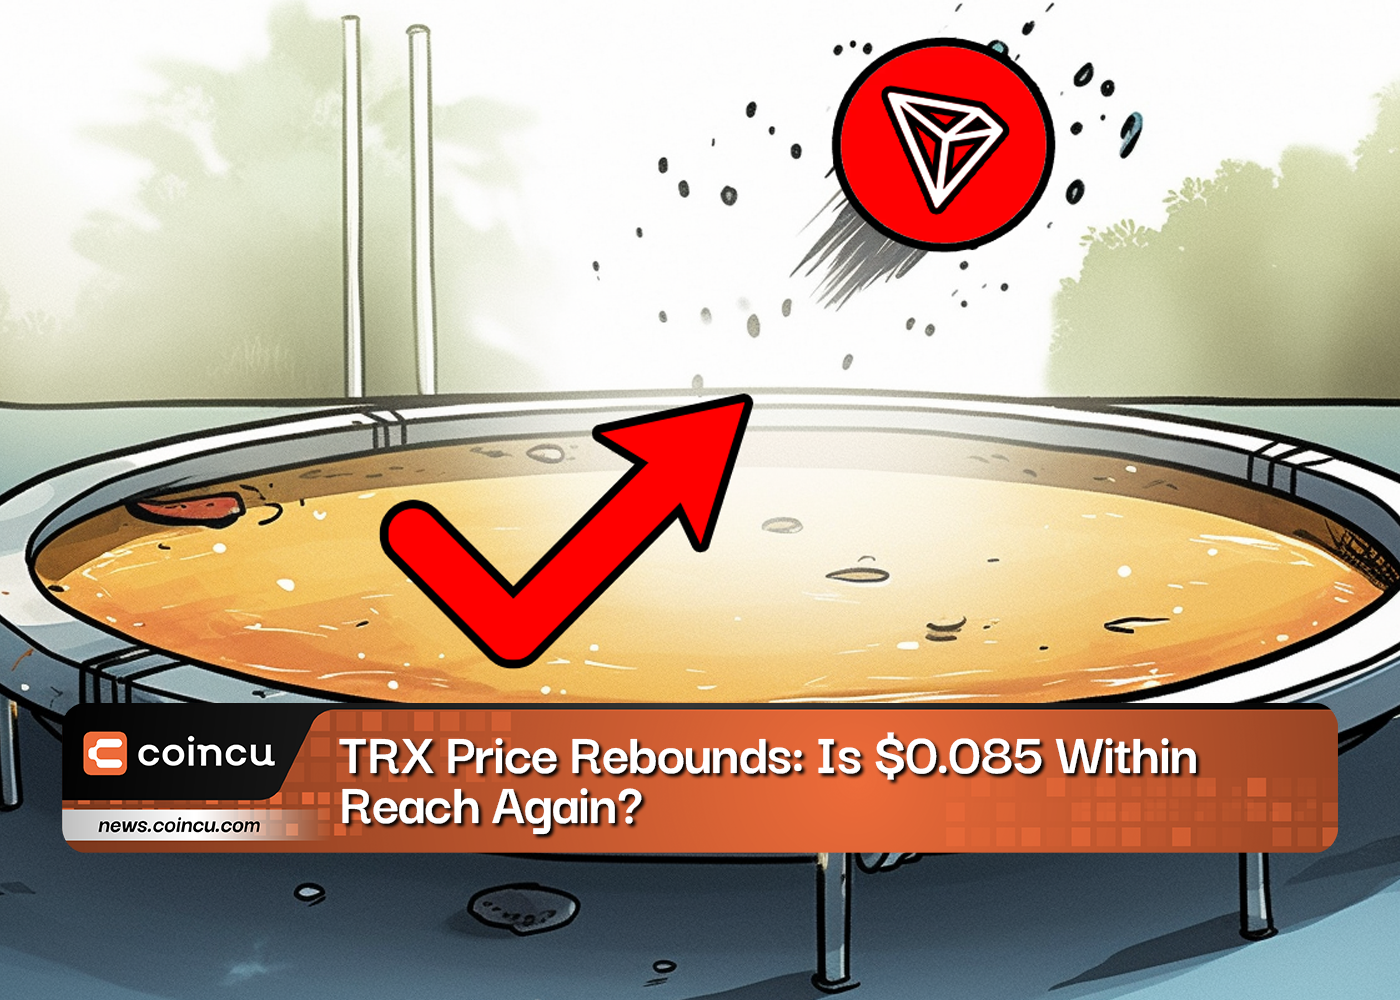 TRX Price Rebounds Is 0.085 Within Reach Again